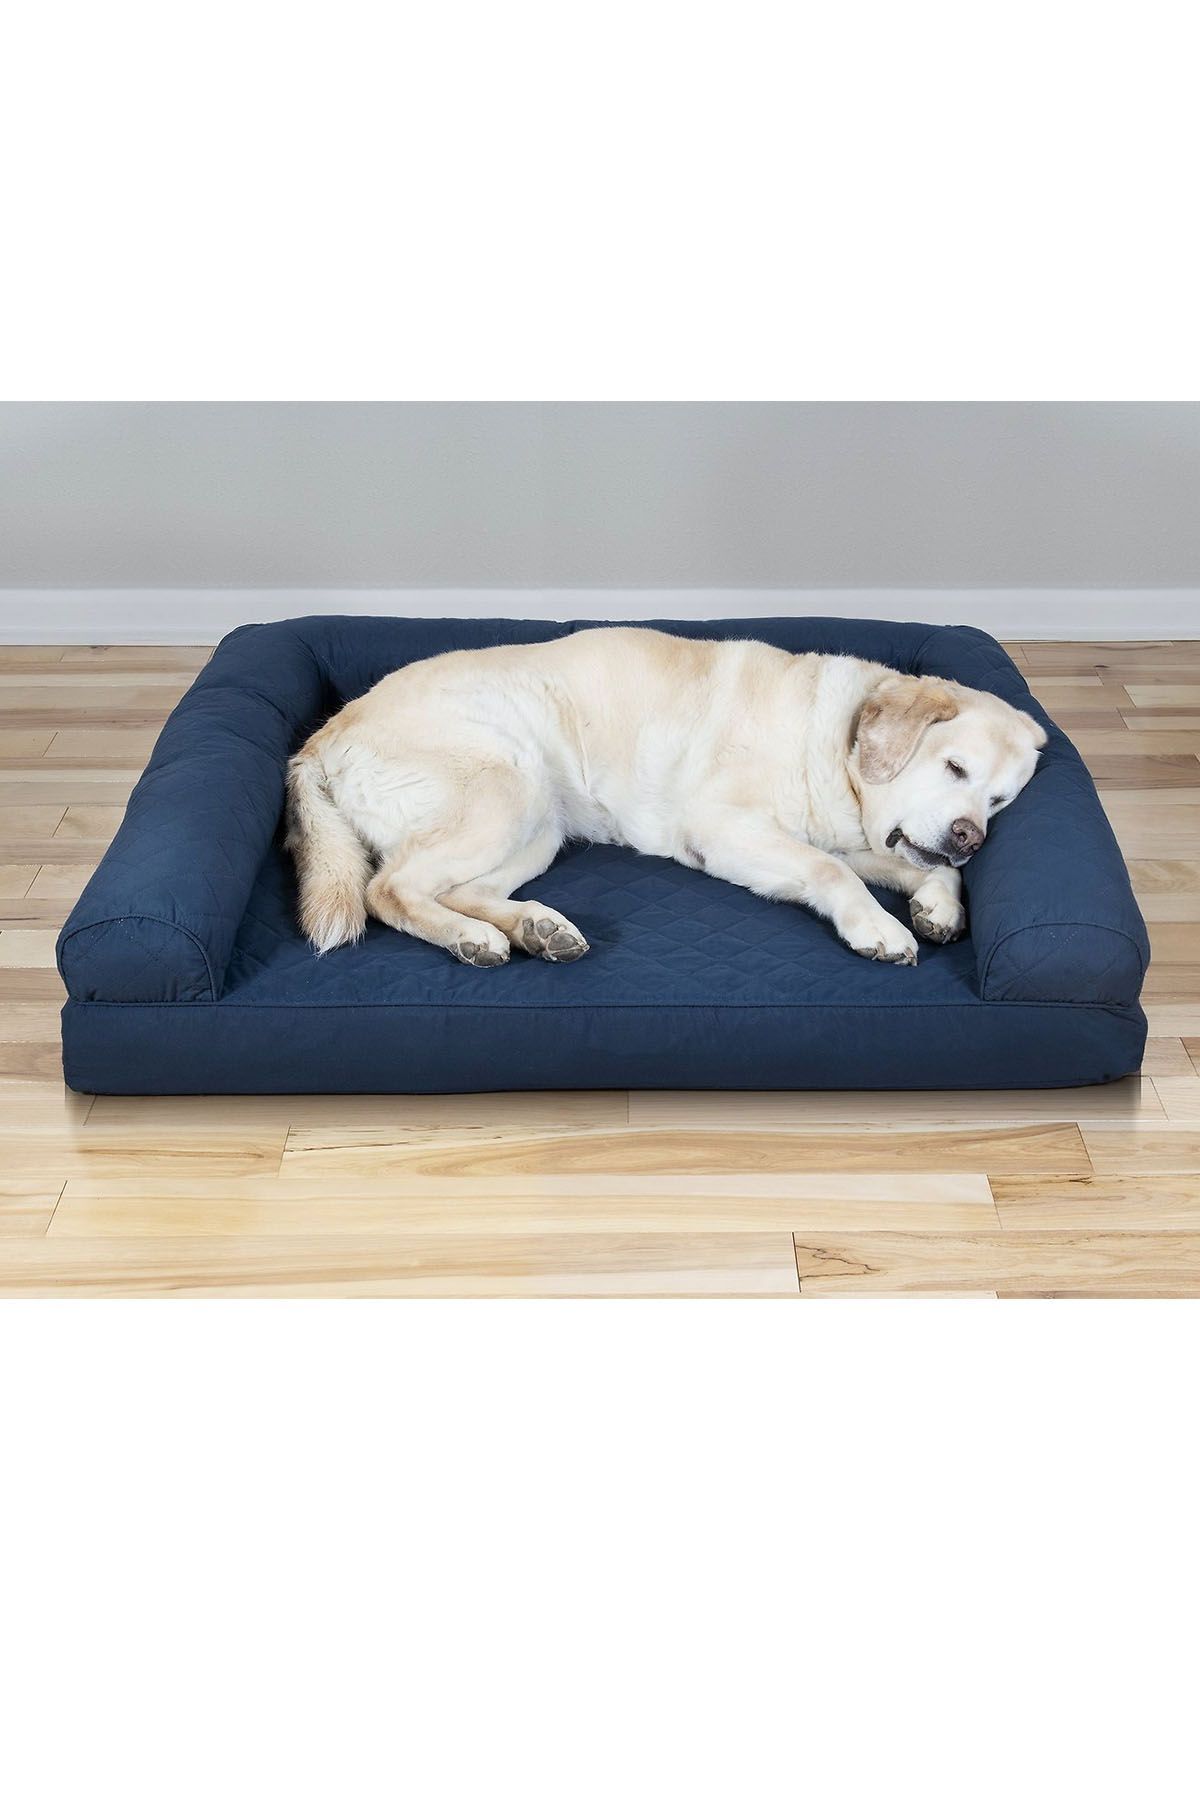 LEUM SHOP Dog Bed Pet Bed Cooling Mat Caming Blanket Breathable Sleeping Bed Cushion 1Pc Black S